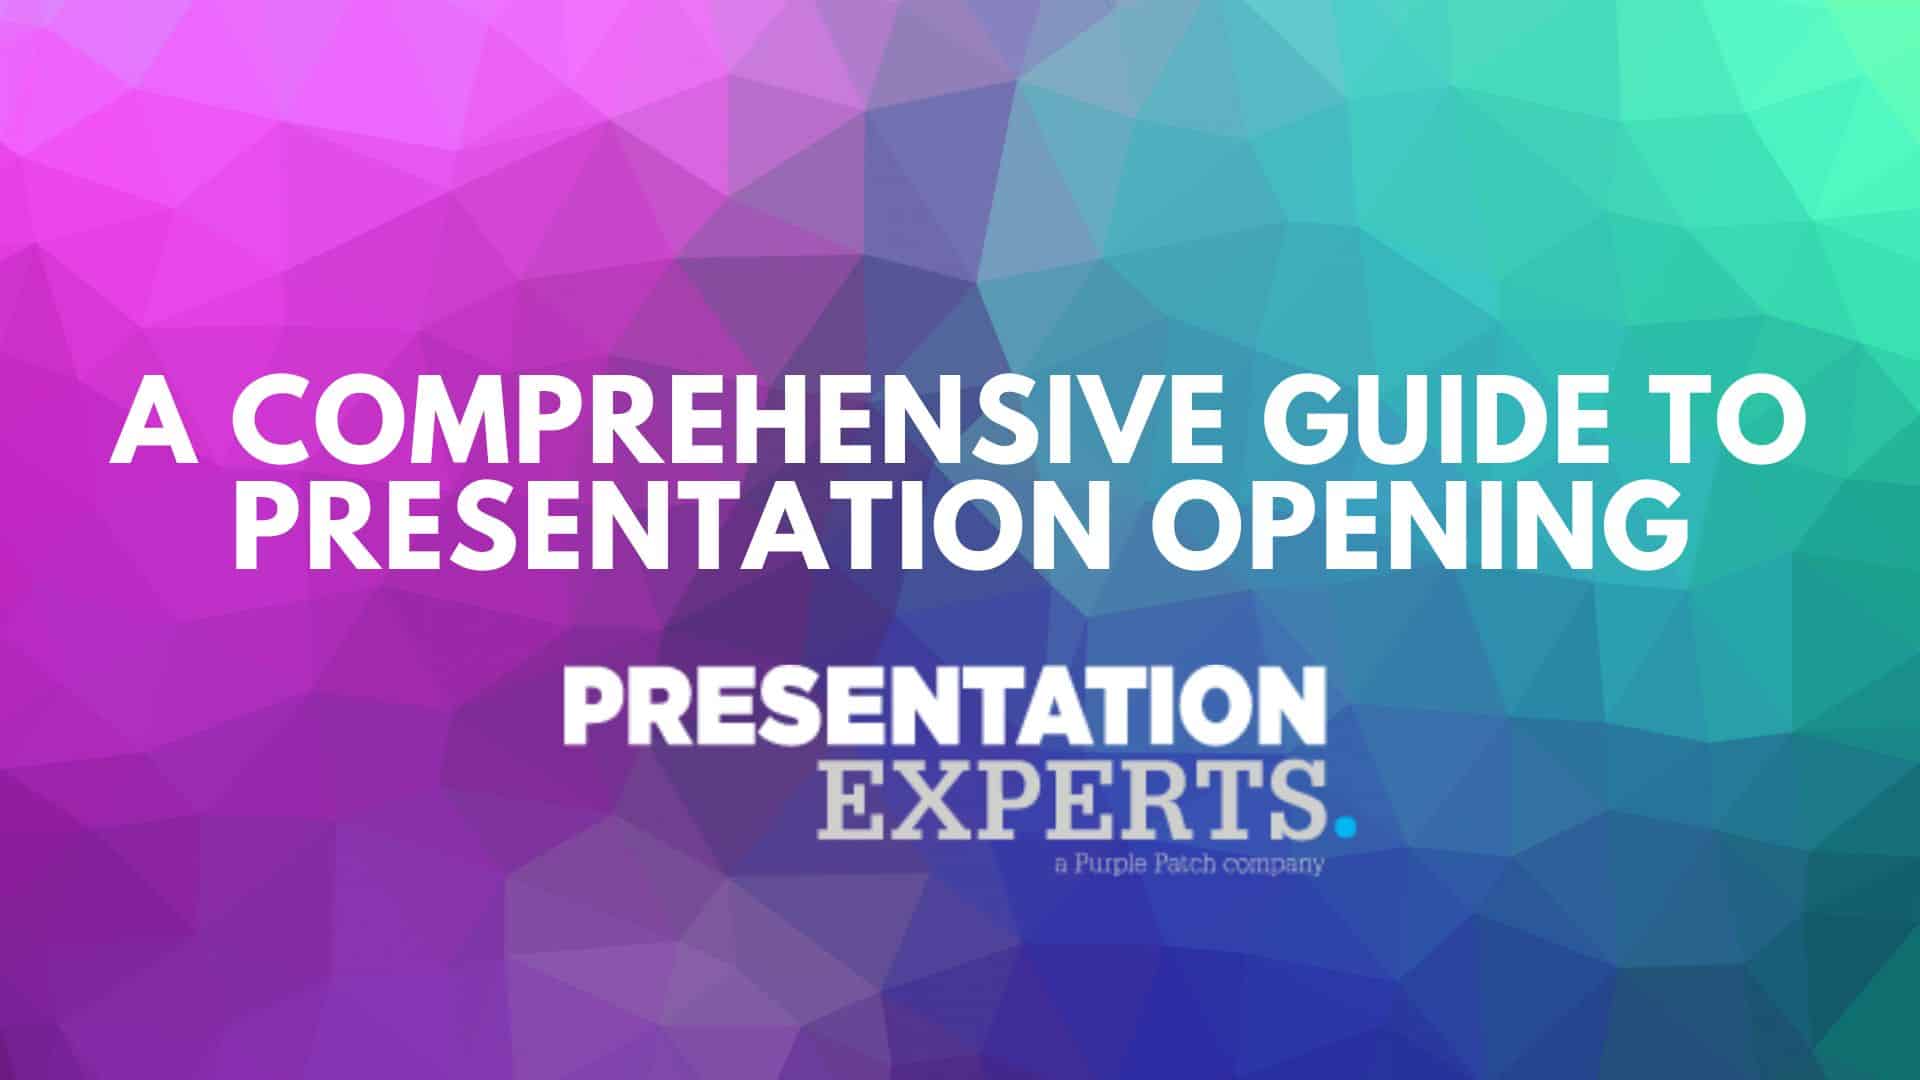 A Comprehensive Guide to Presentation Opening